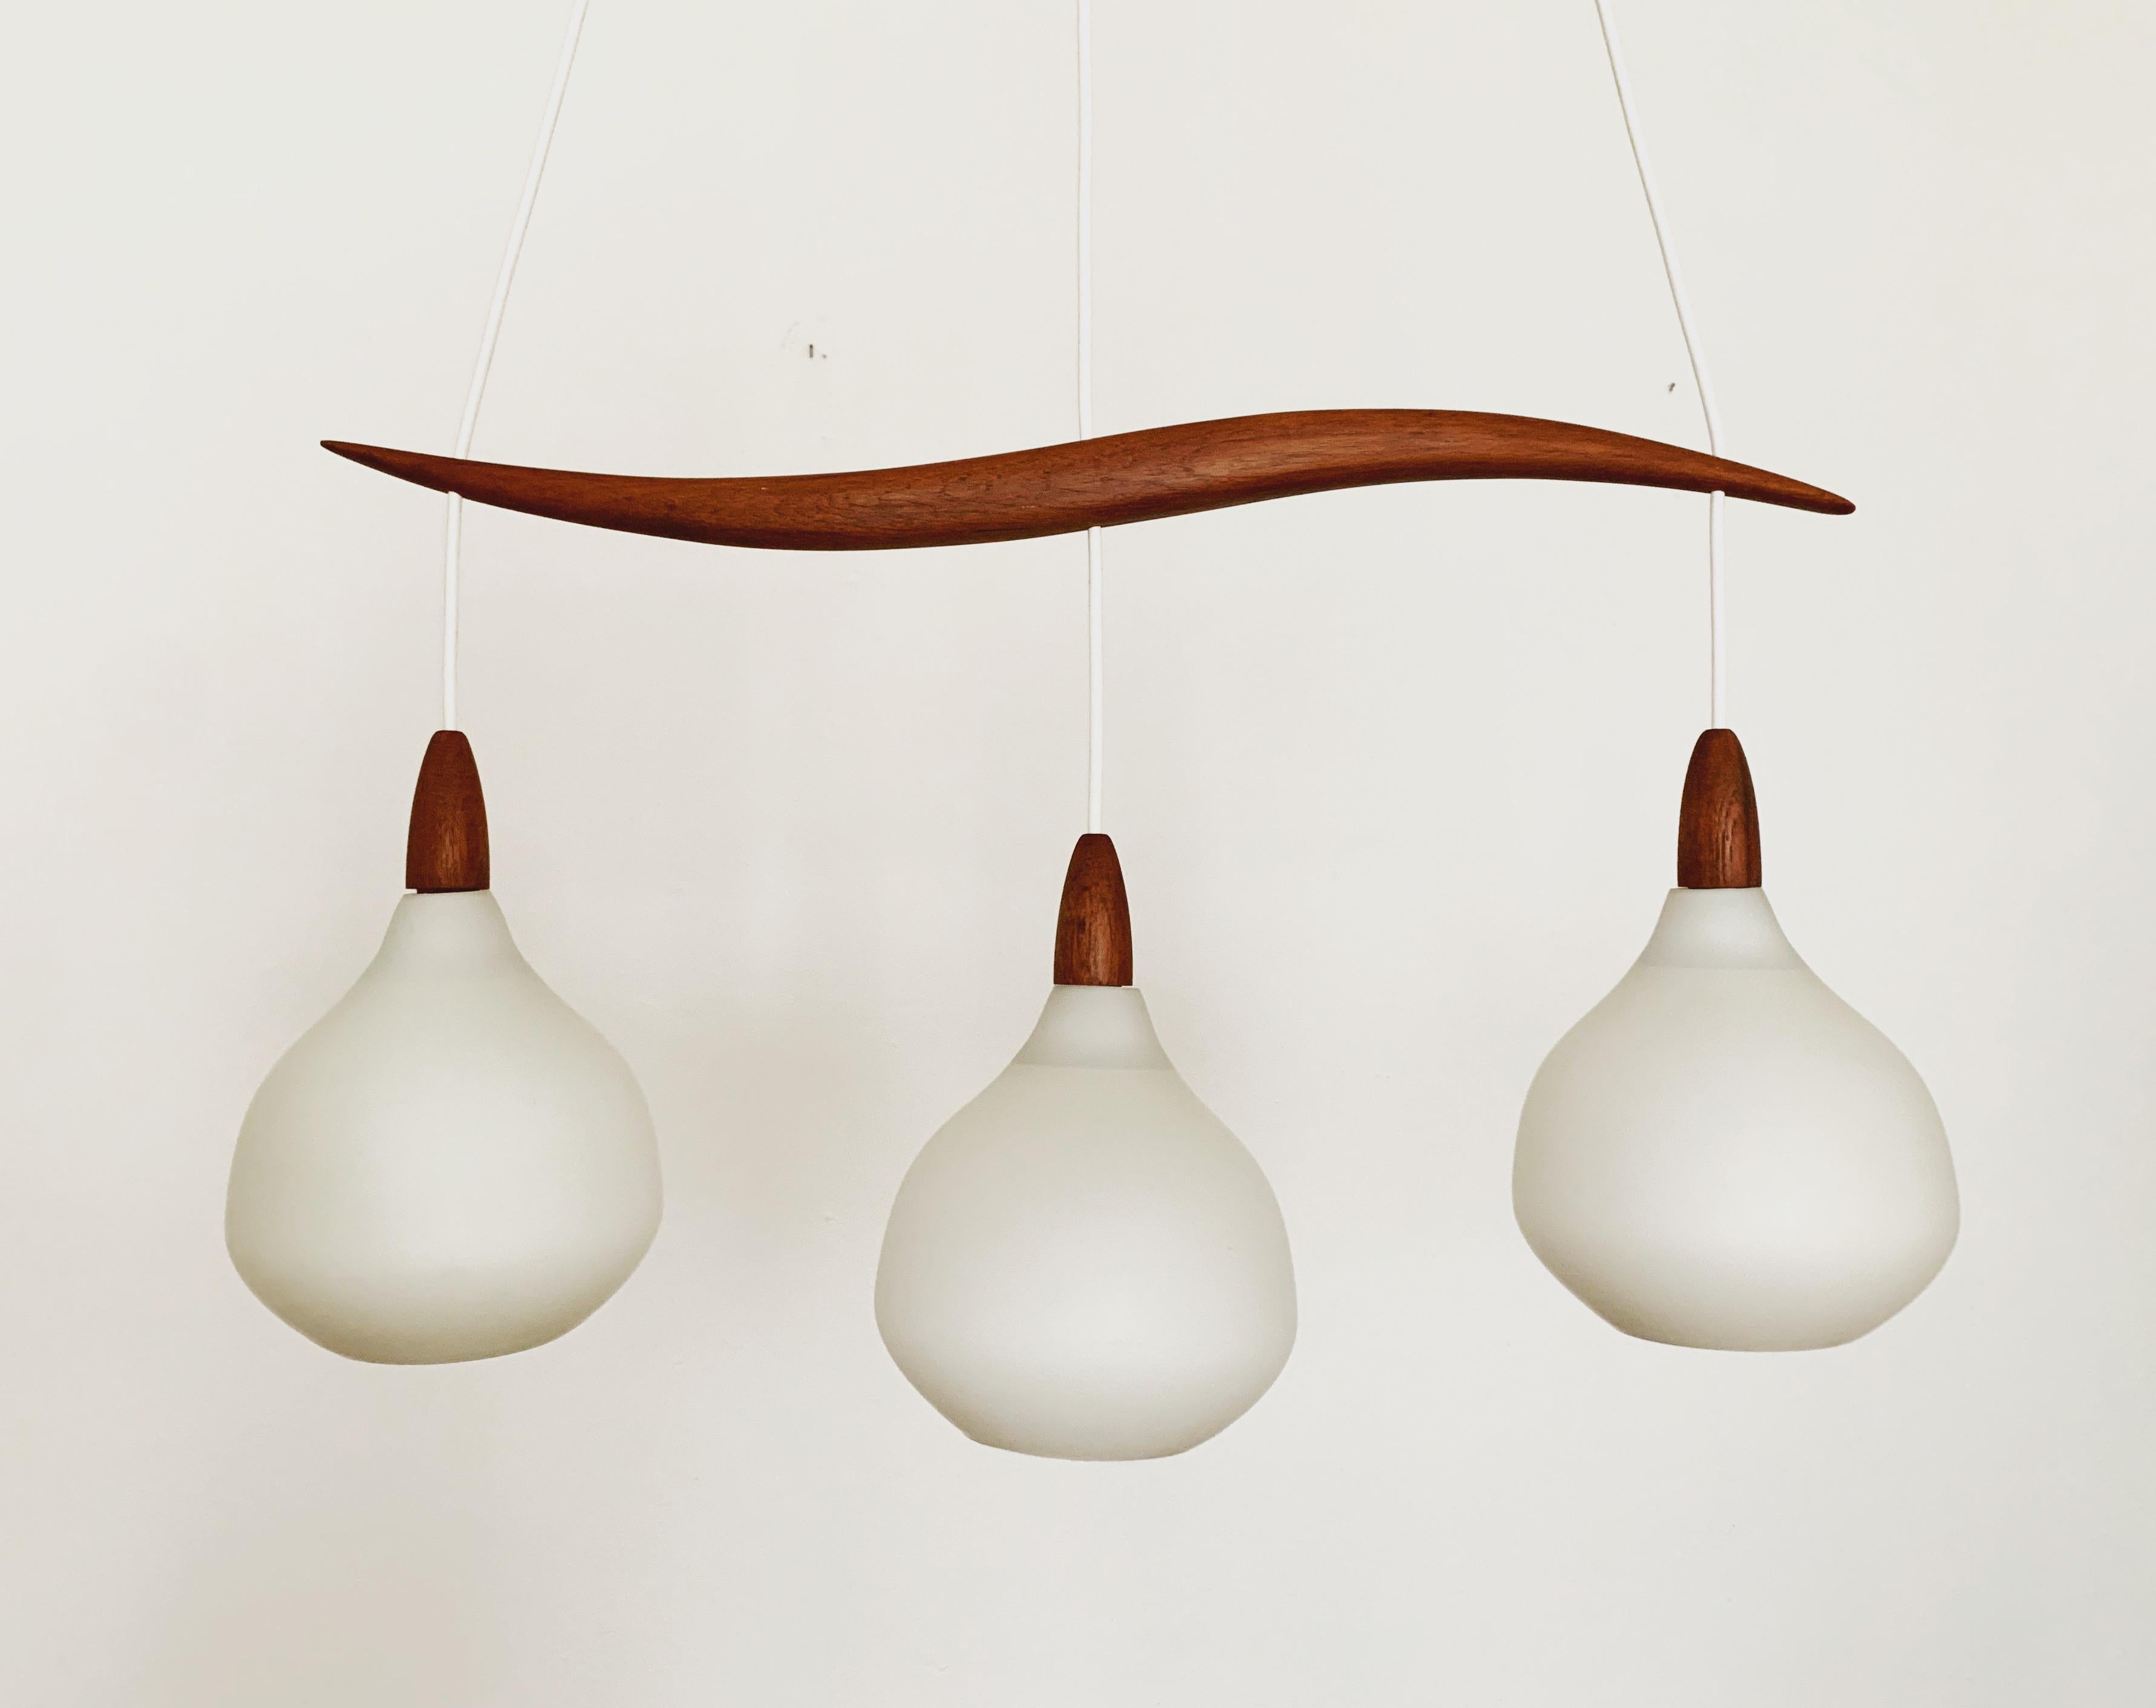 Wonderful Swedish opal glass pendant lamp from the 1960s.
Great and exceptionally minimalistic design with a fantastically elegant look.
Very nice teak details.

Manufacturer: Luxus
Design: Uno and Östen Kristiansson
Around